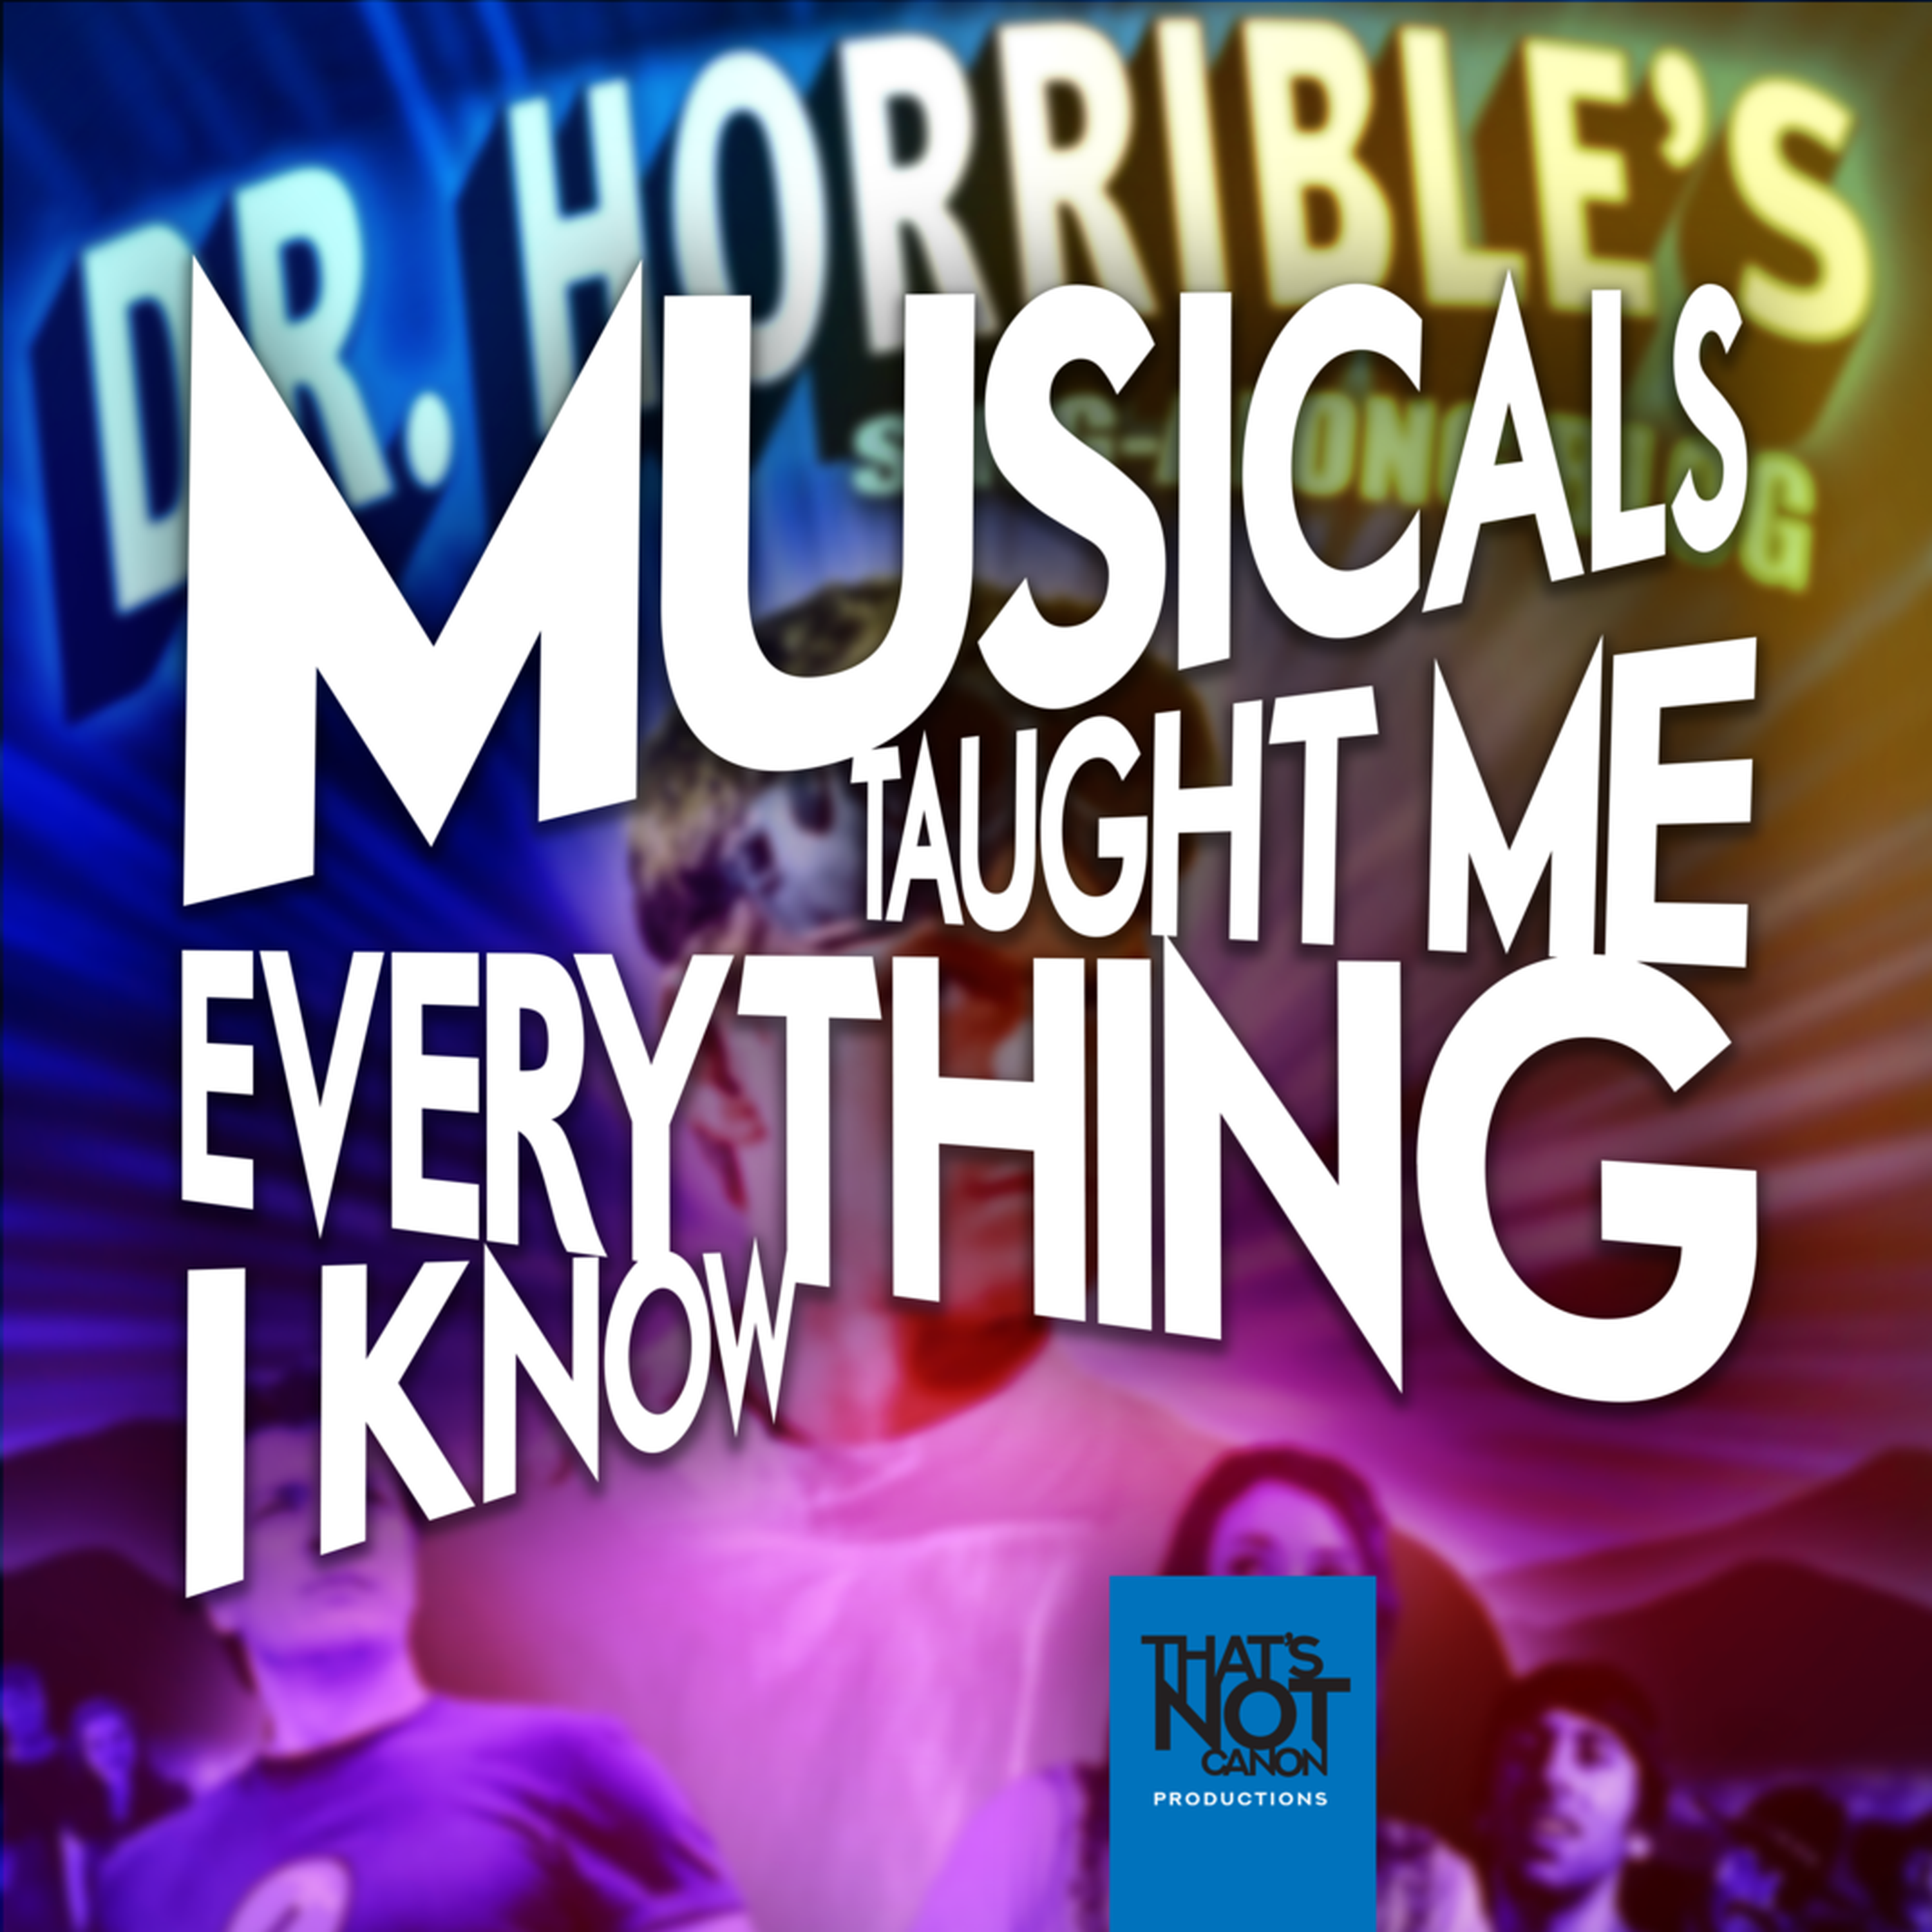 cover art for Dr. Horrible's Sing-Along Blog with Nicole Goulter